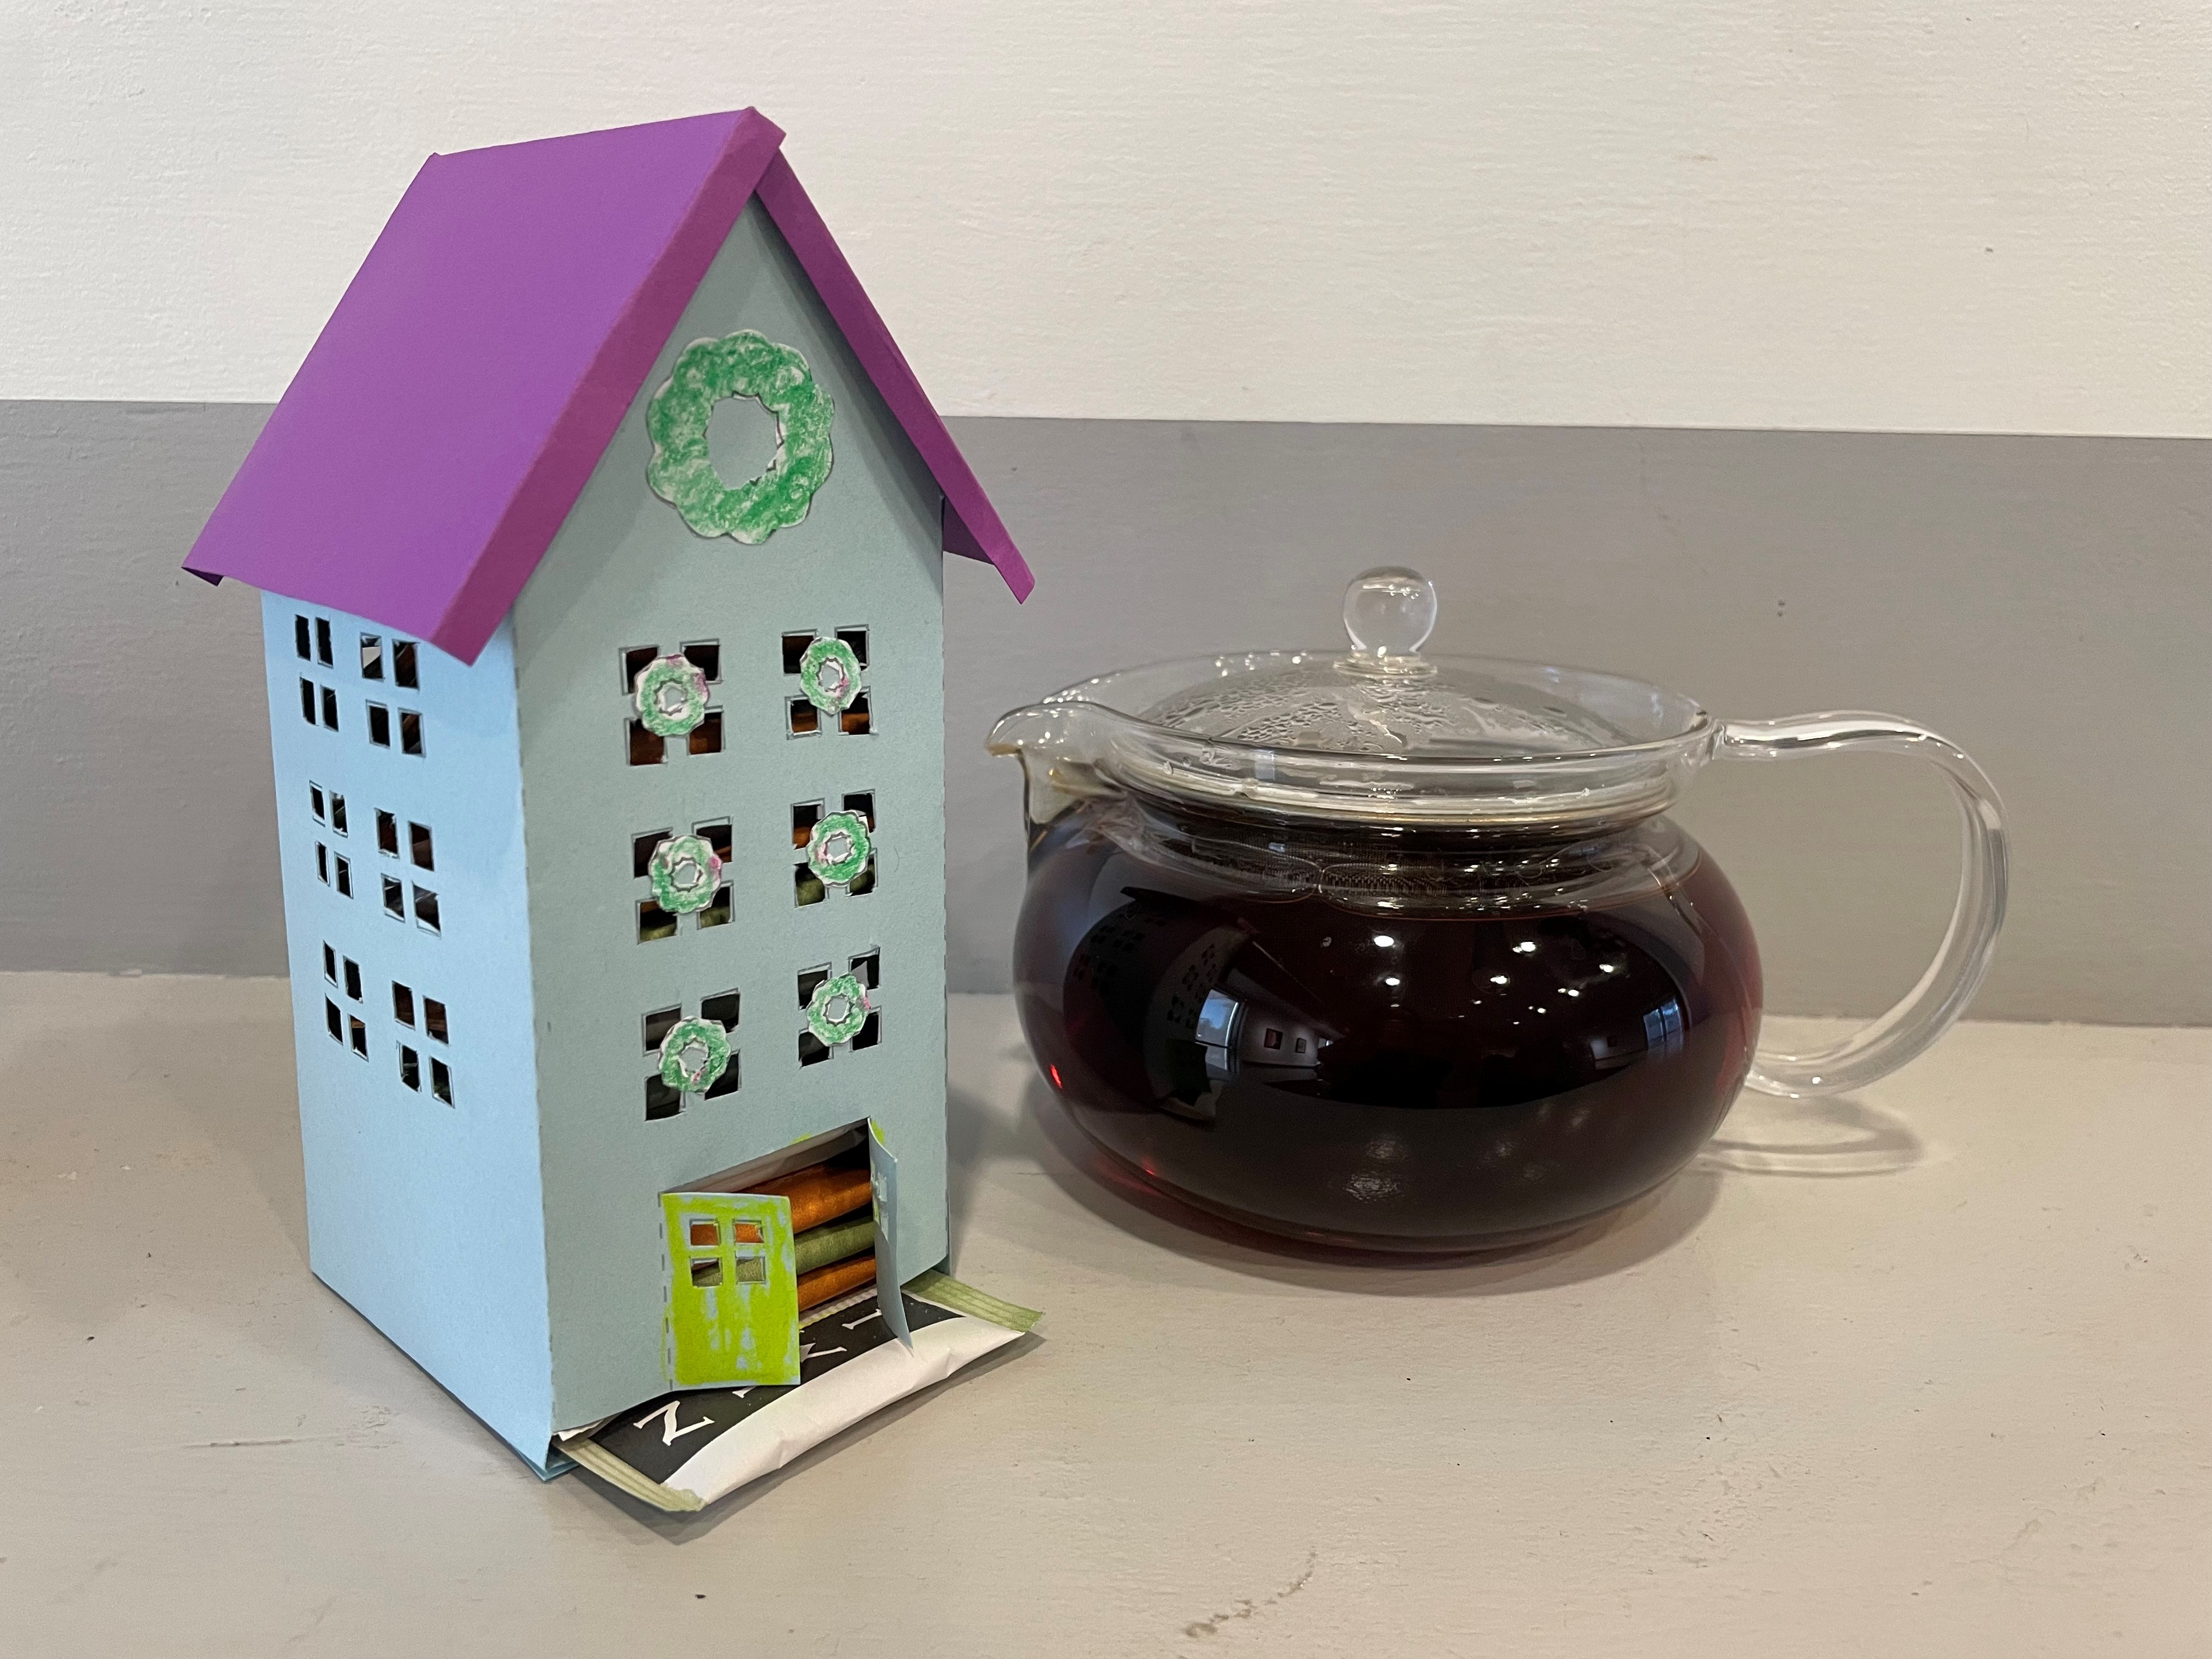 Tall paper house filled with tea bags, next to a tea pot